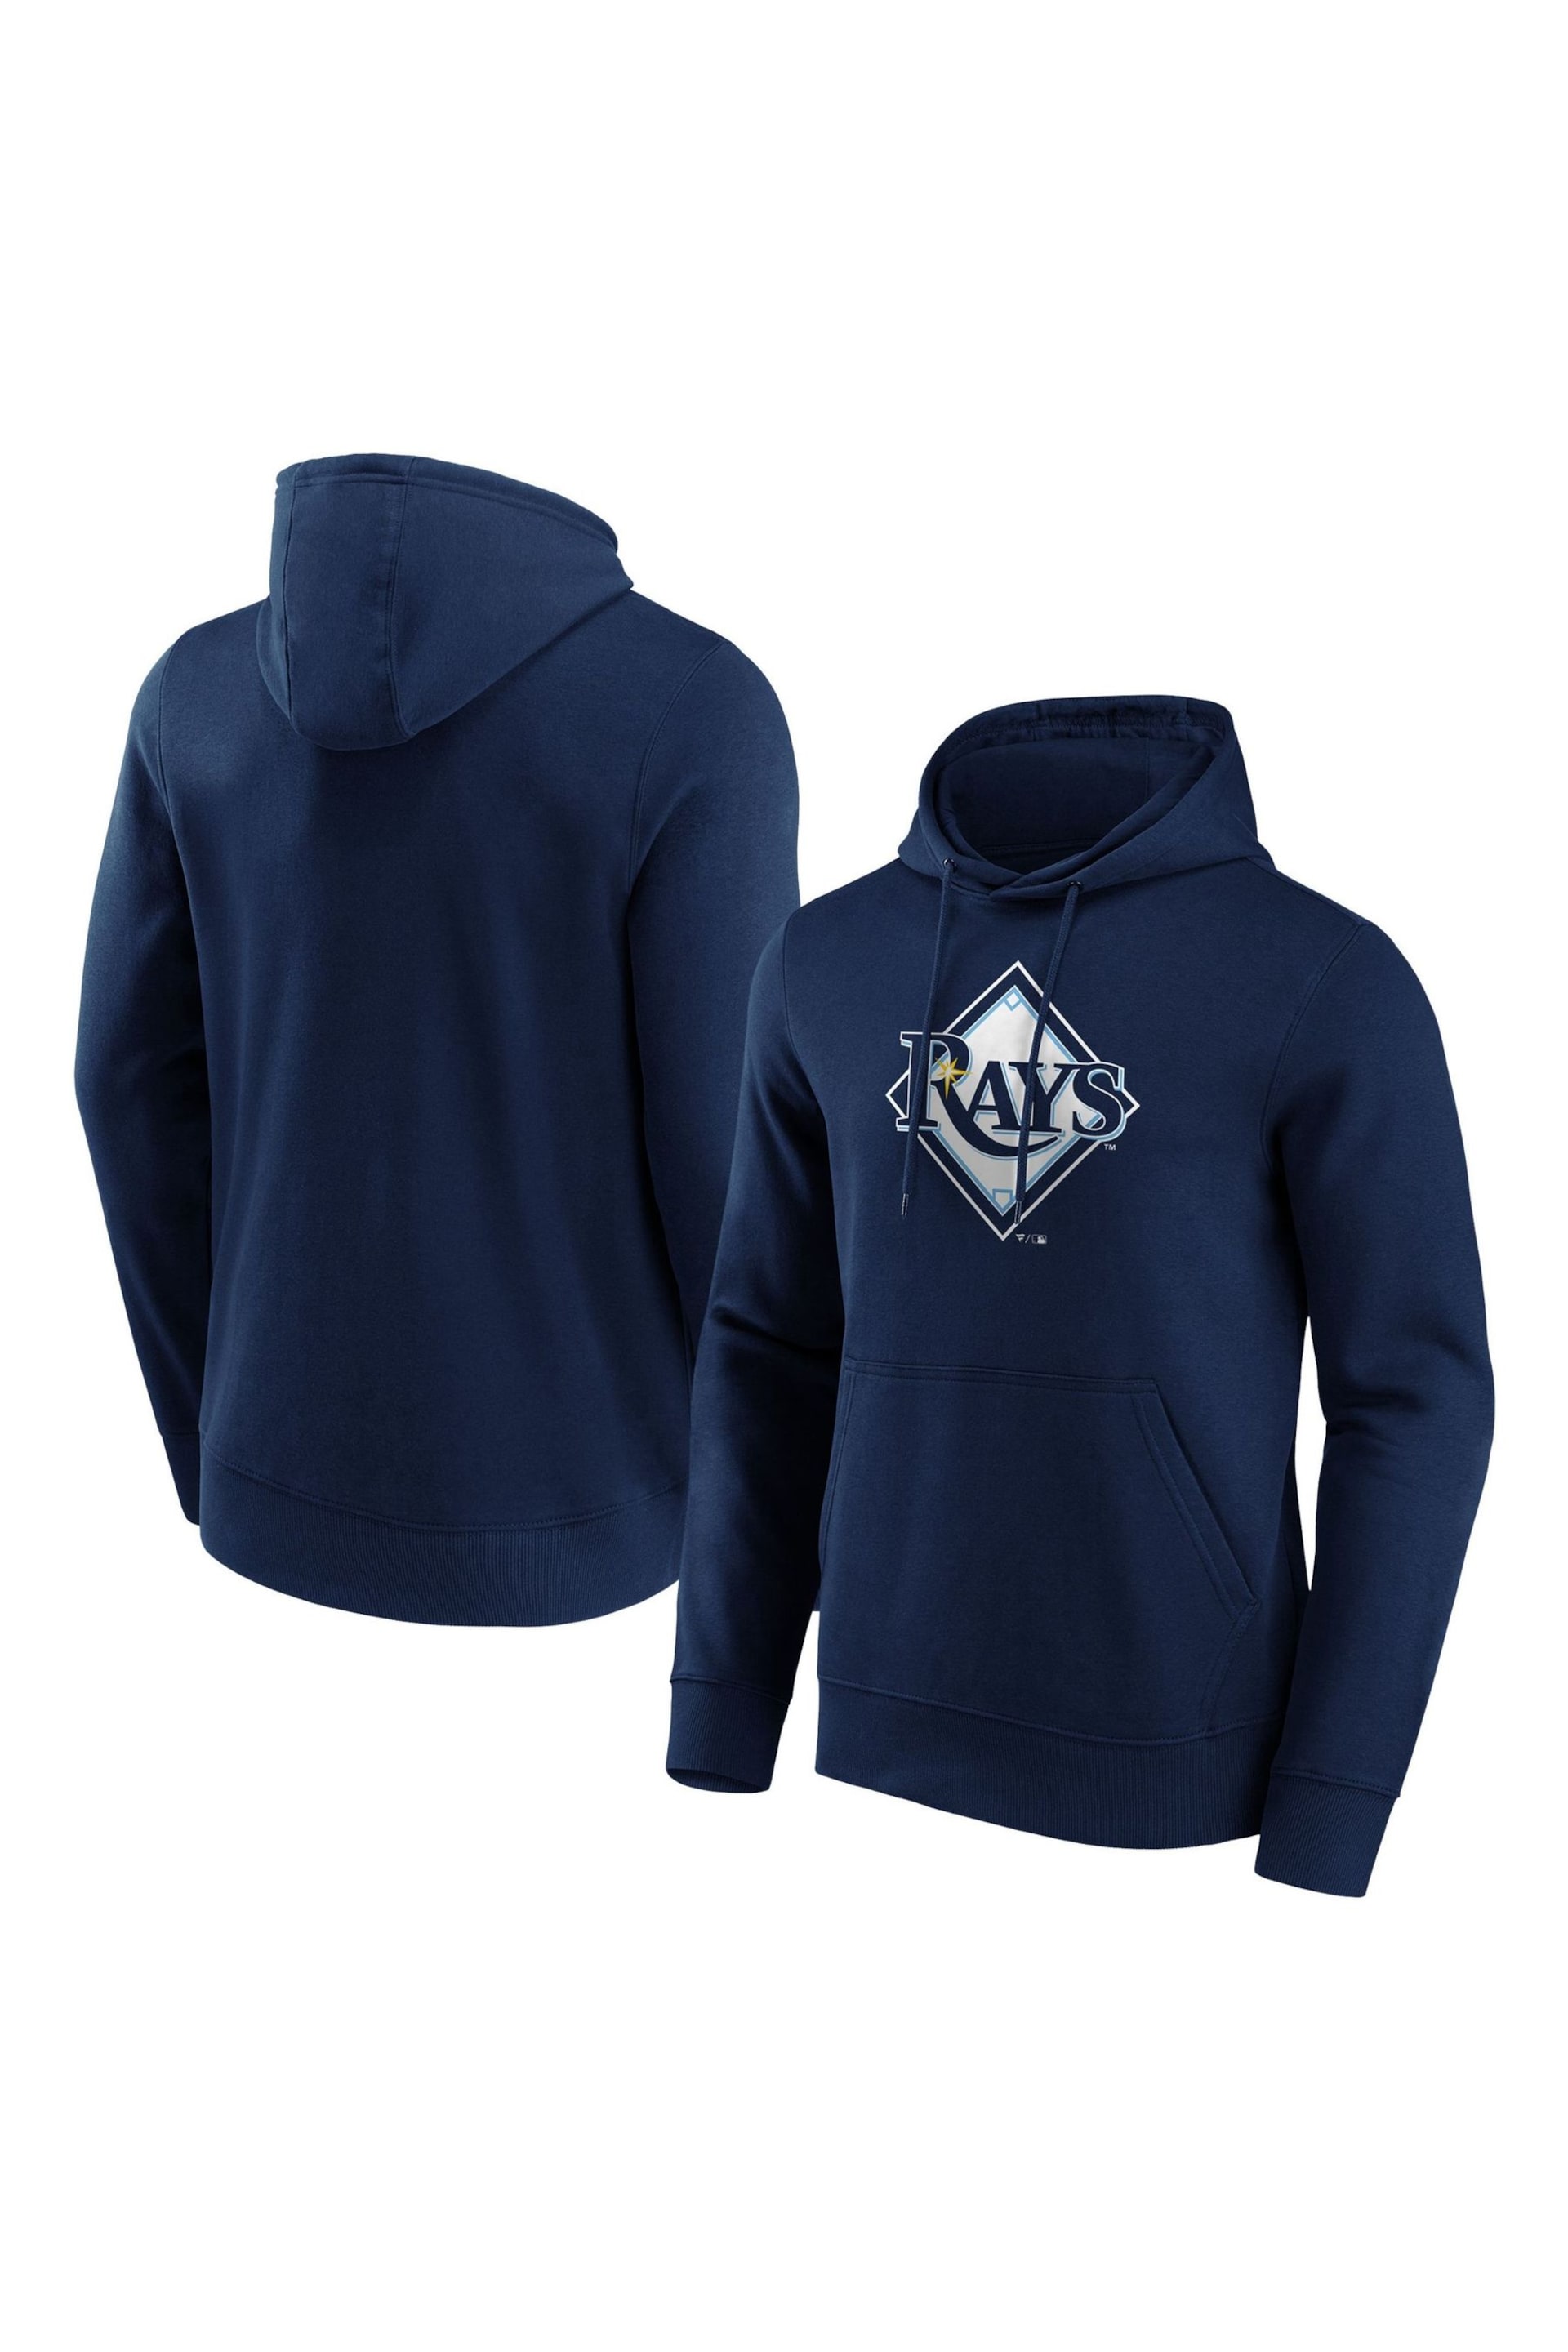 MLB Tampa Bay Rays Primary Logo Graphic Hoodie - Image 1 of 3